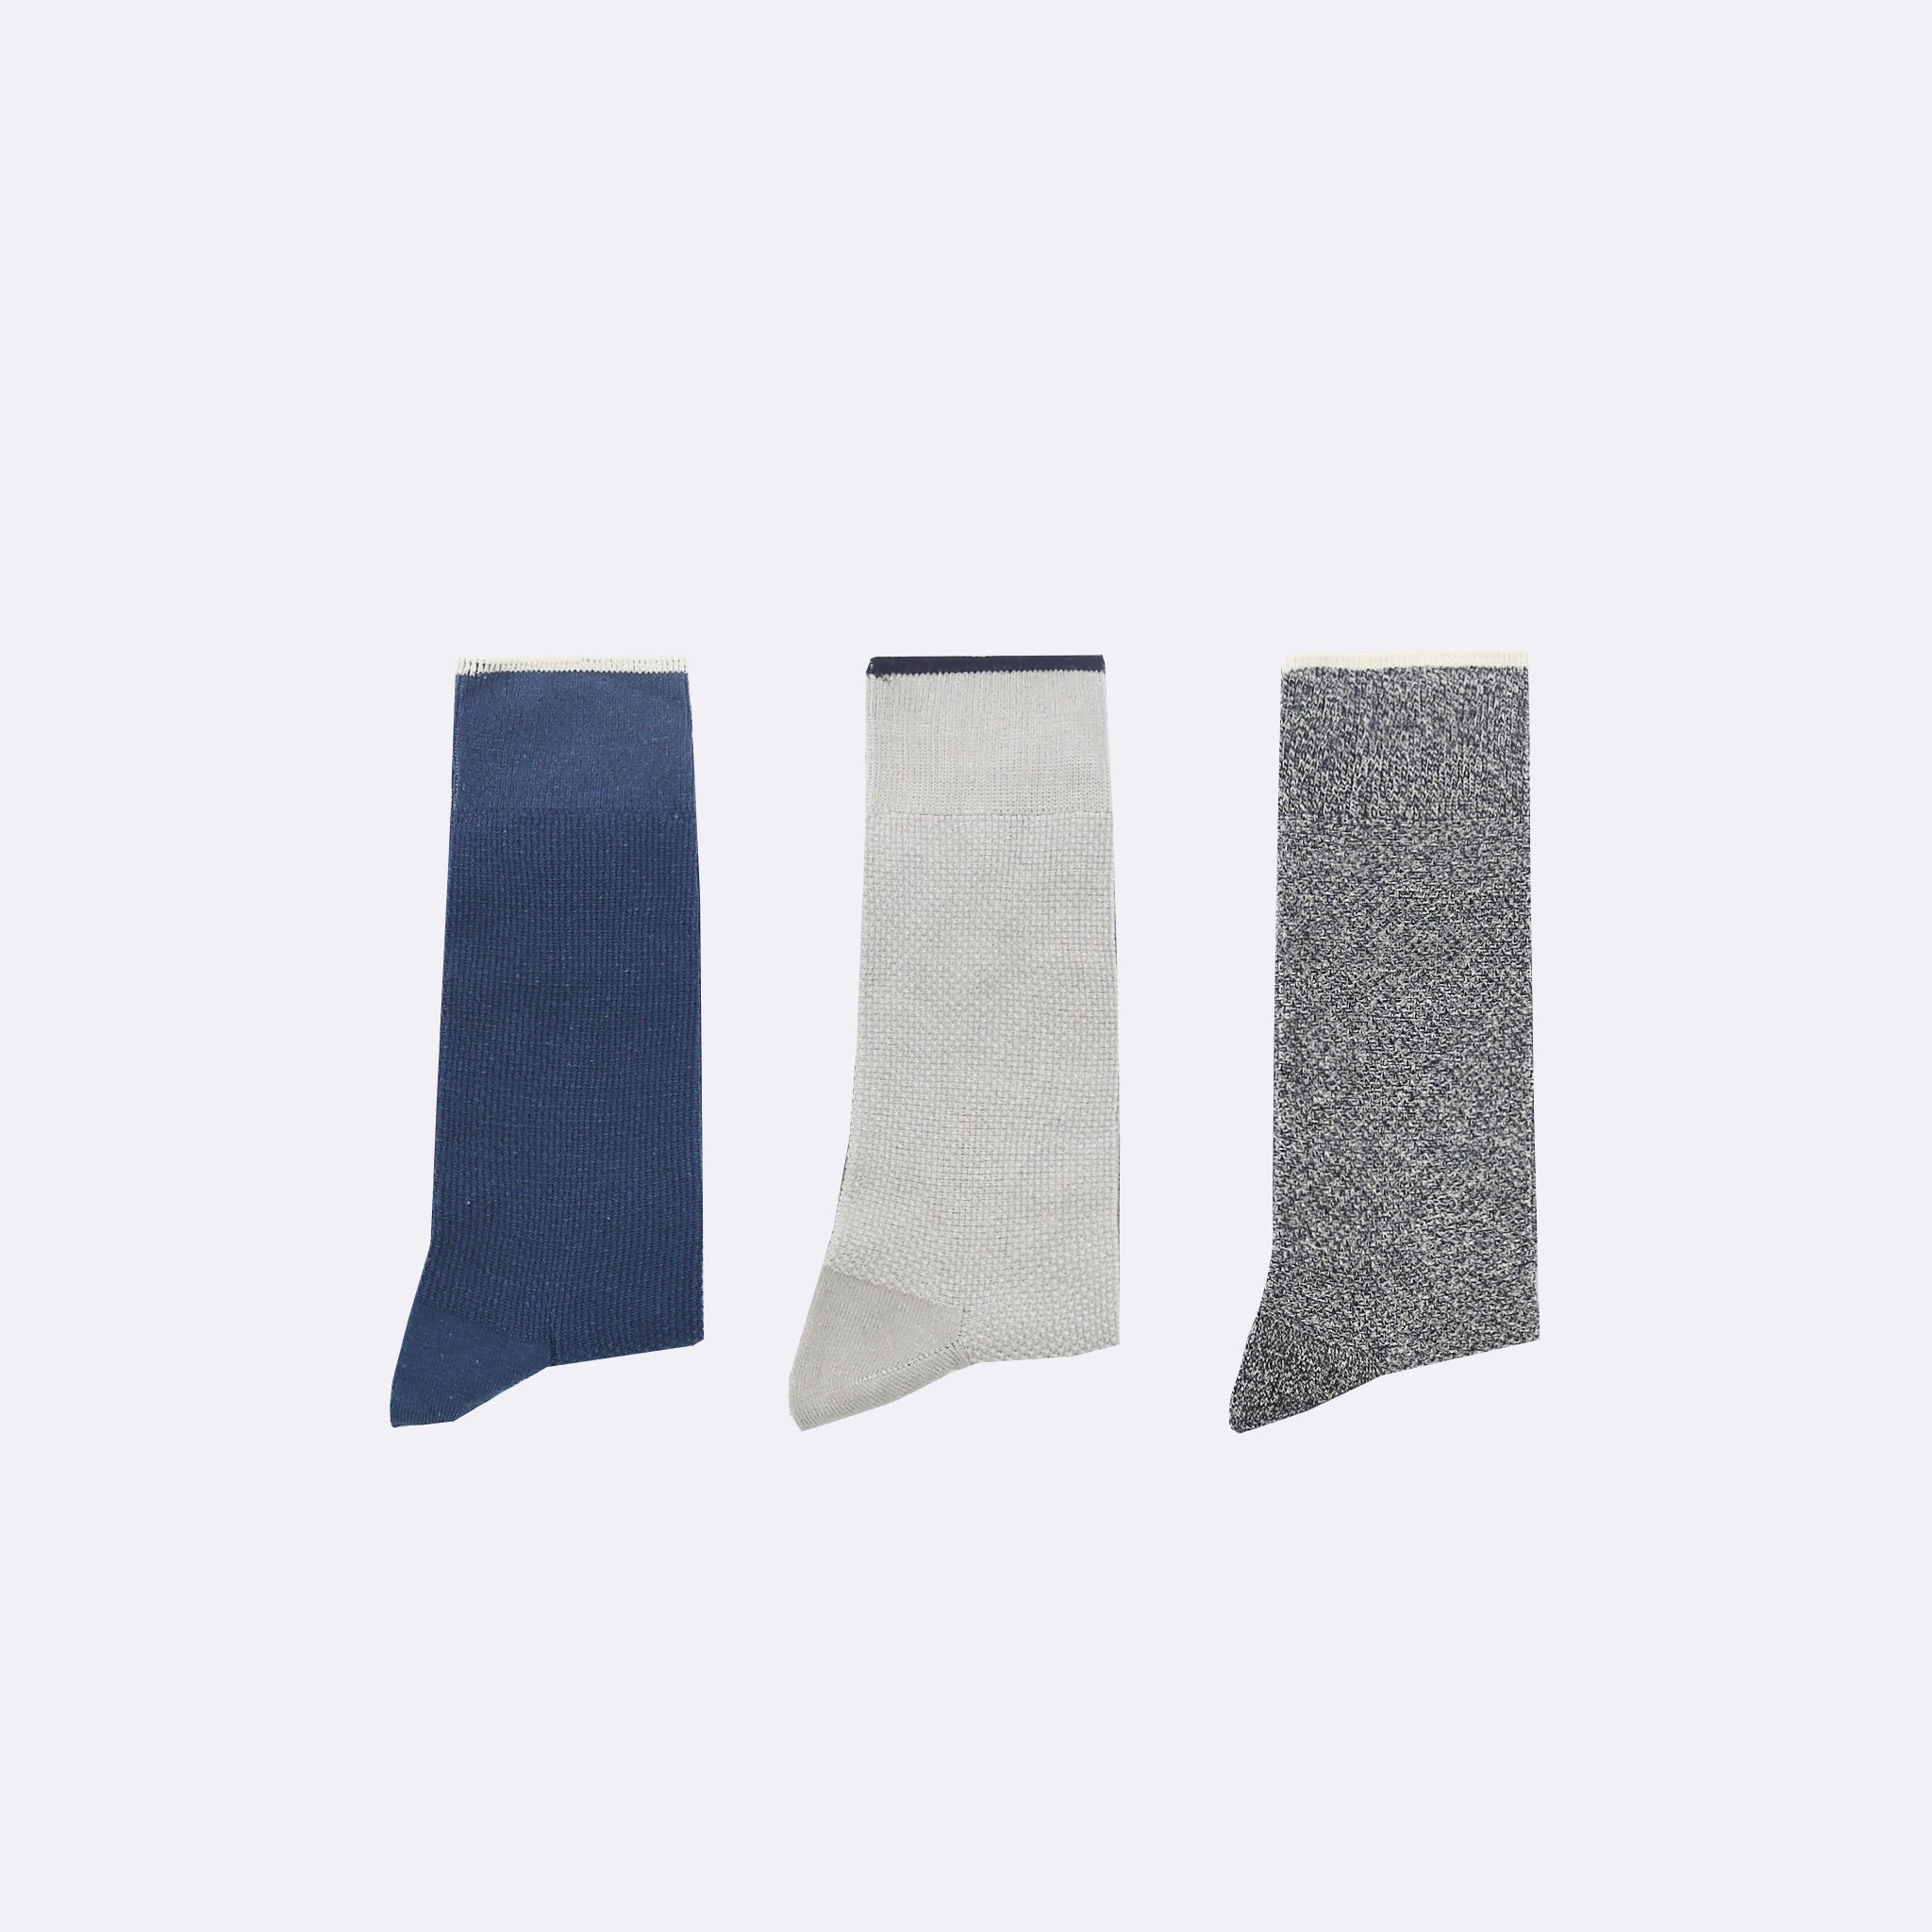 Faguo - Set of 3X Socks - Blue, Grey and Beige - The Good Chic